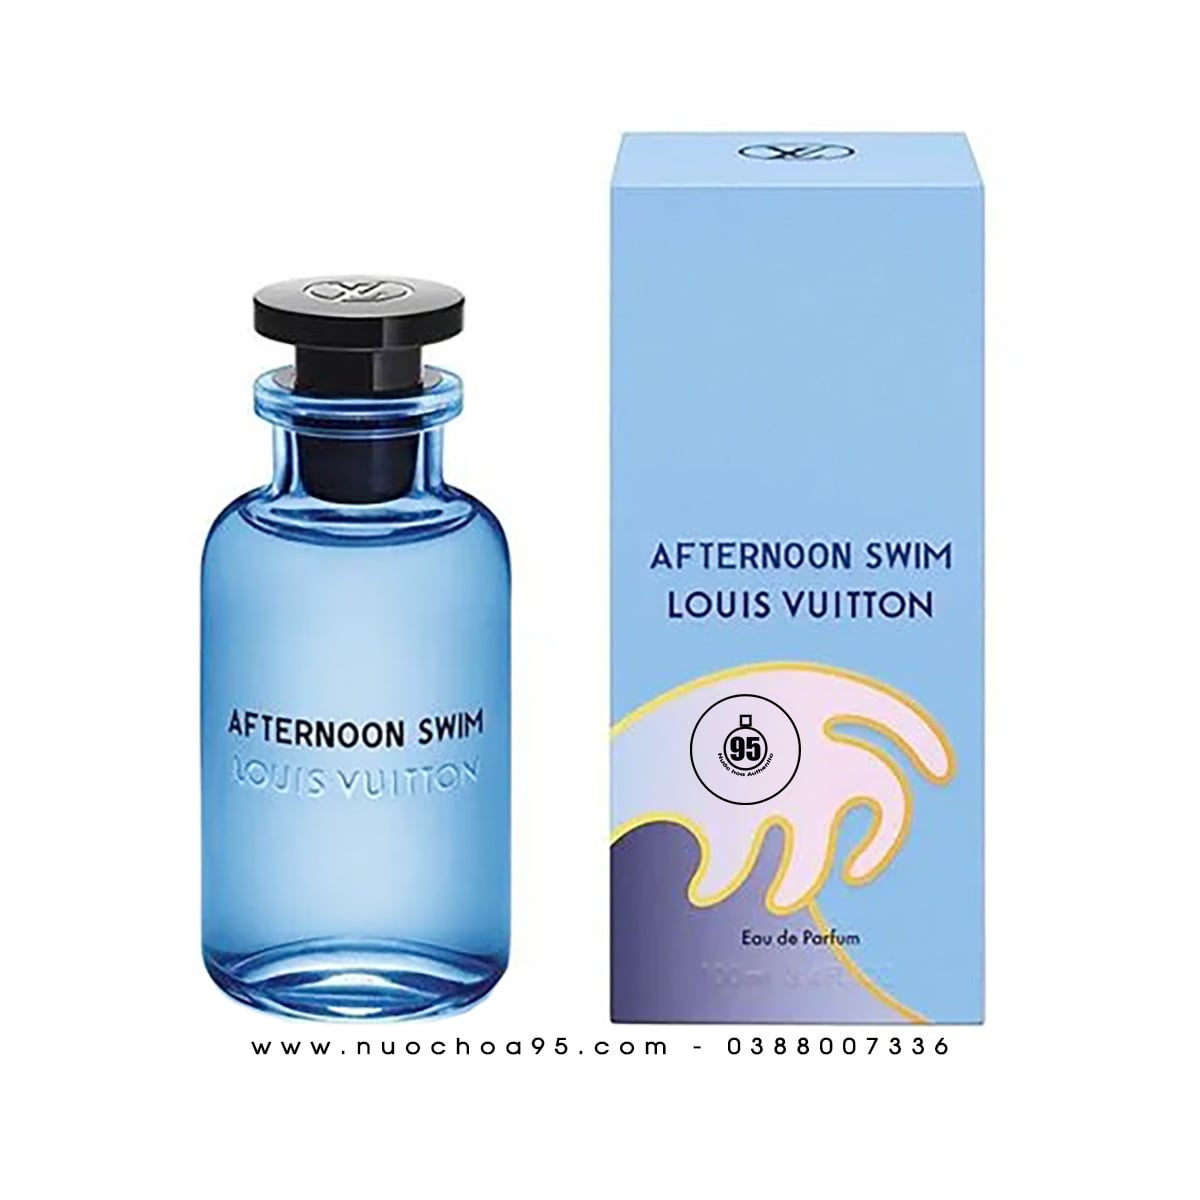 NEW Louis Vuitton AFTERNOON SWIM REVIEW  THIS IS A GREAT FRESH FRAGRANCE  FOR EVERYONE   YouTube